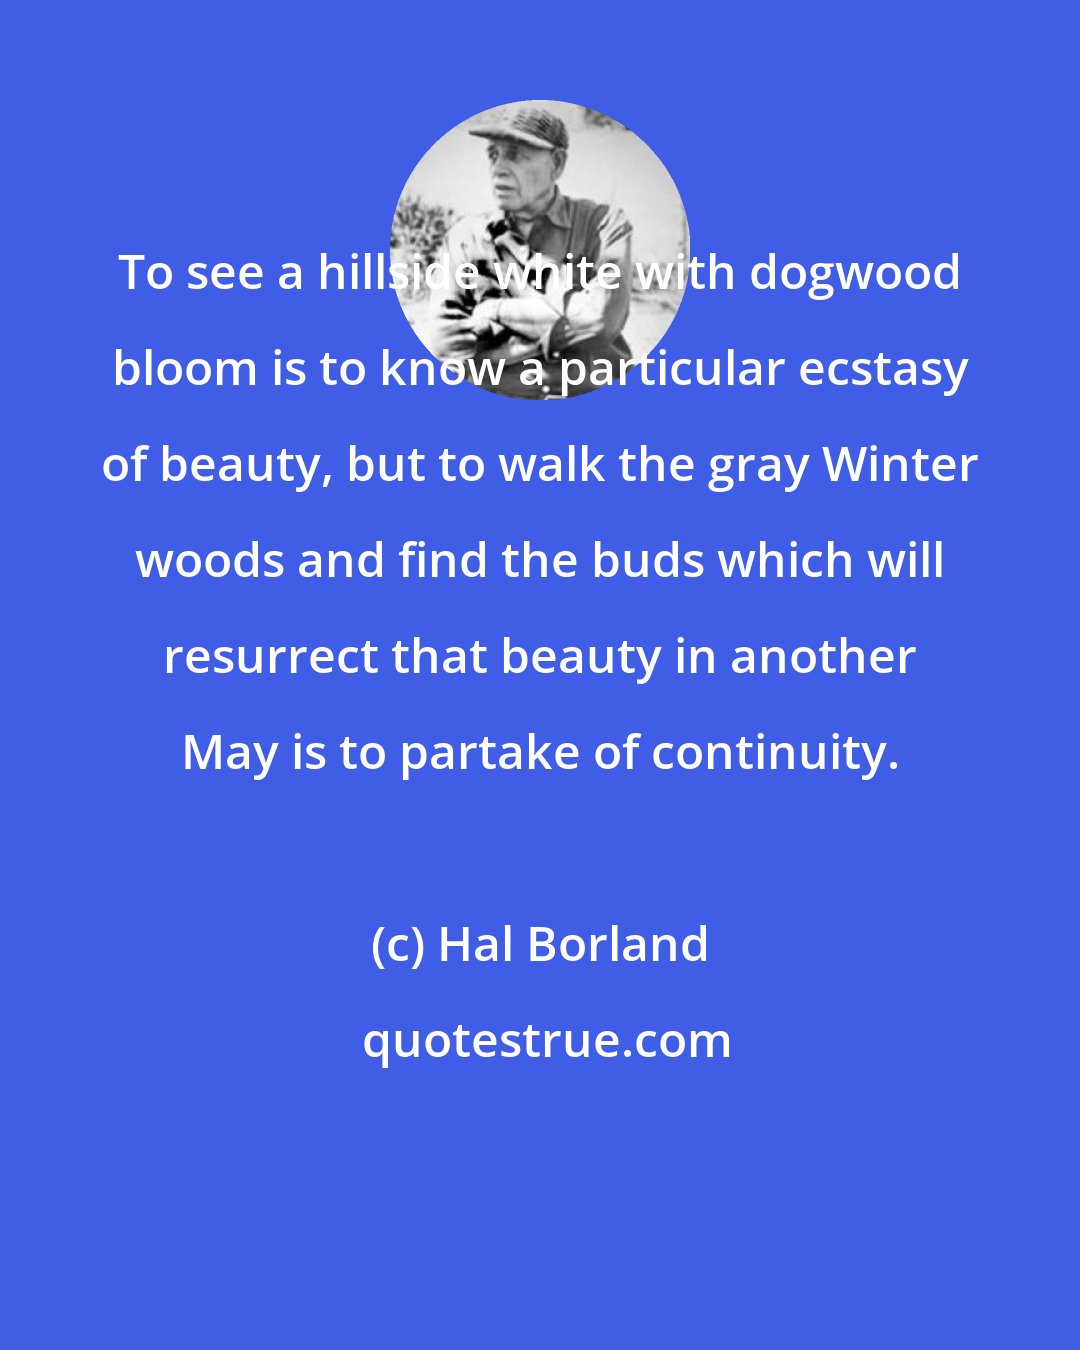 Hal Borland: To see a hillside white with dogwood bloom is to know a particular ecstasy of beauty, but to walk the gray Winter woods and find the buds which will resurrect that beauty in another May is to partake of continuity.